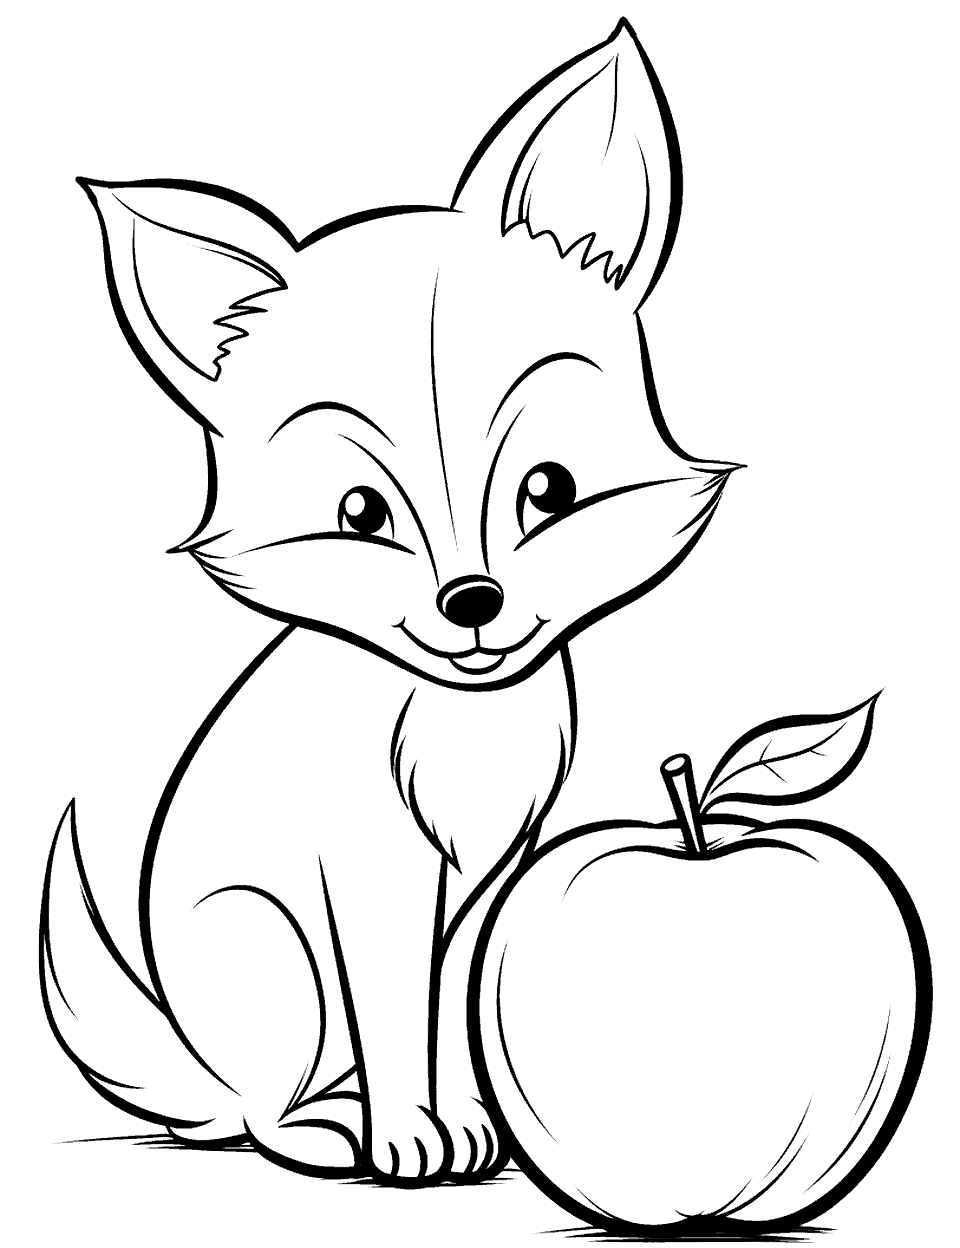 Little Fox and Apple Coloring Page - A cute fox looking curiously at an apple on the ground.